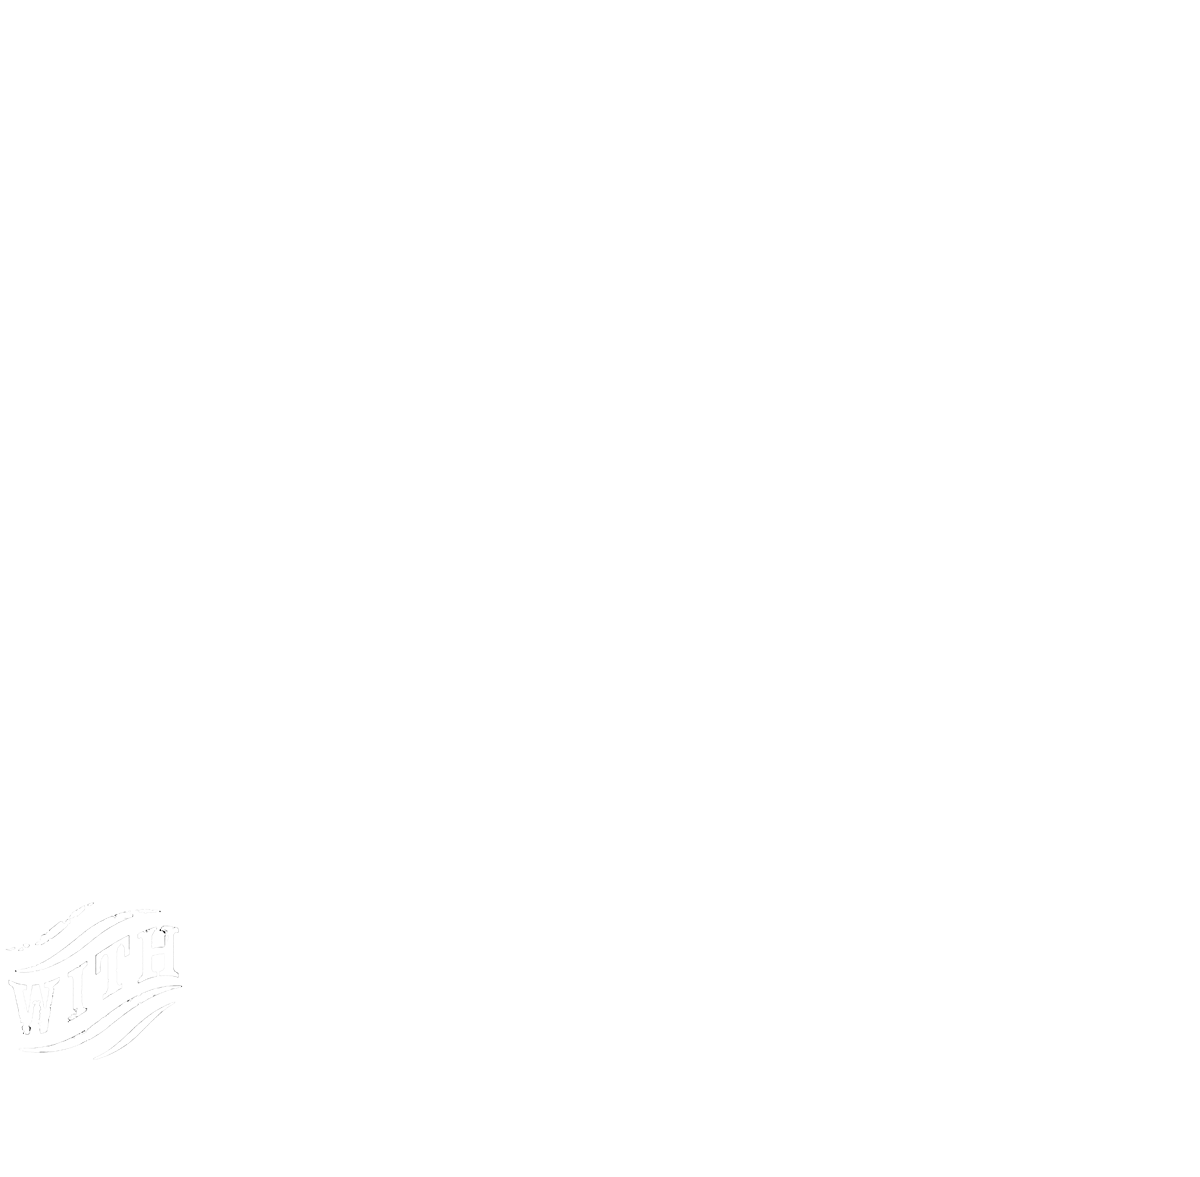 Bruce Springsteen with the Seeger Sessions Band Tour logo